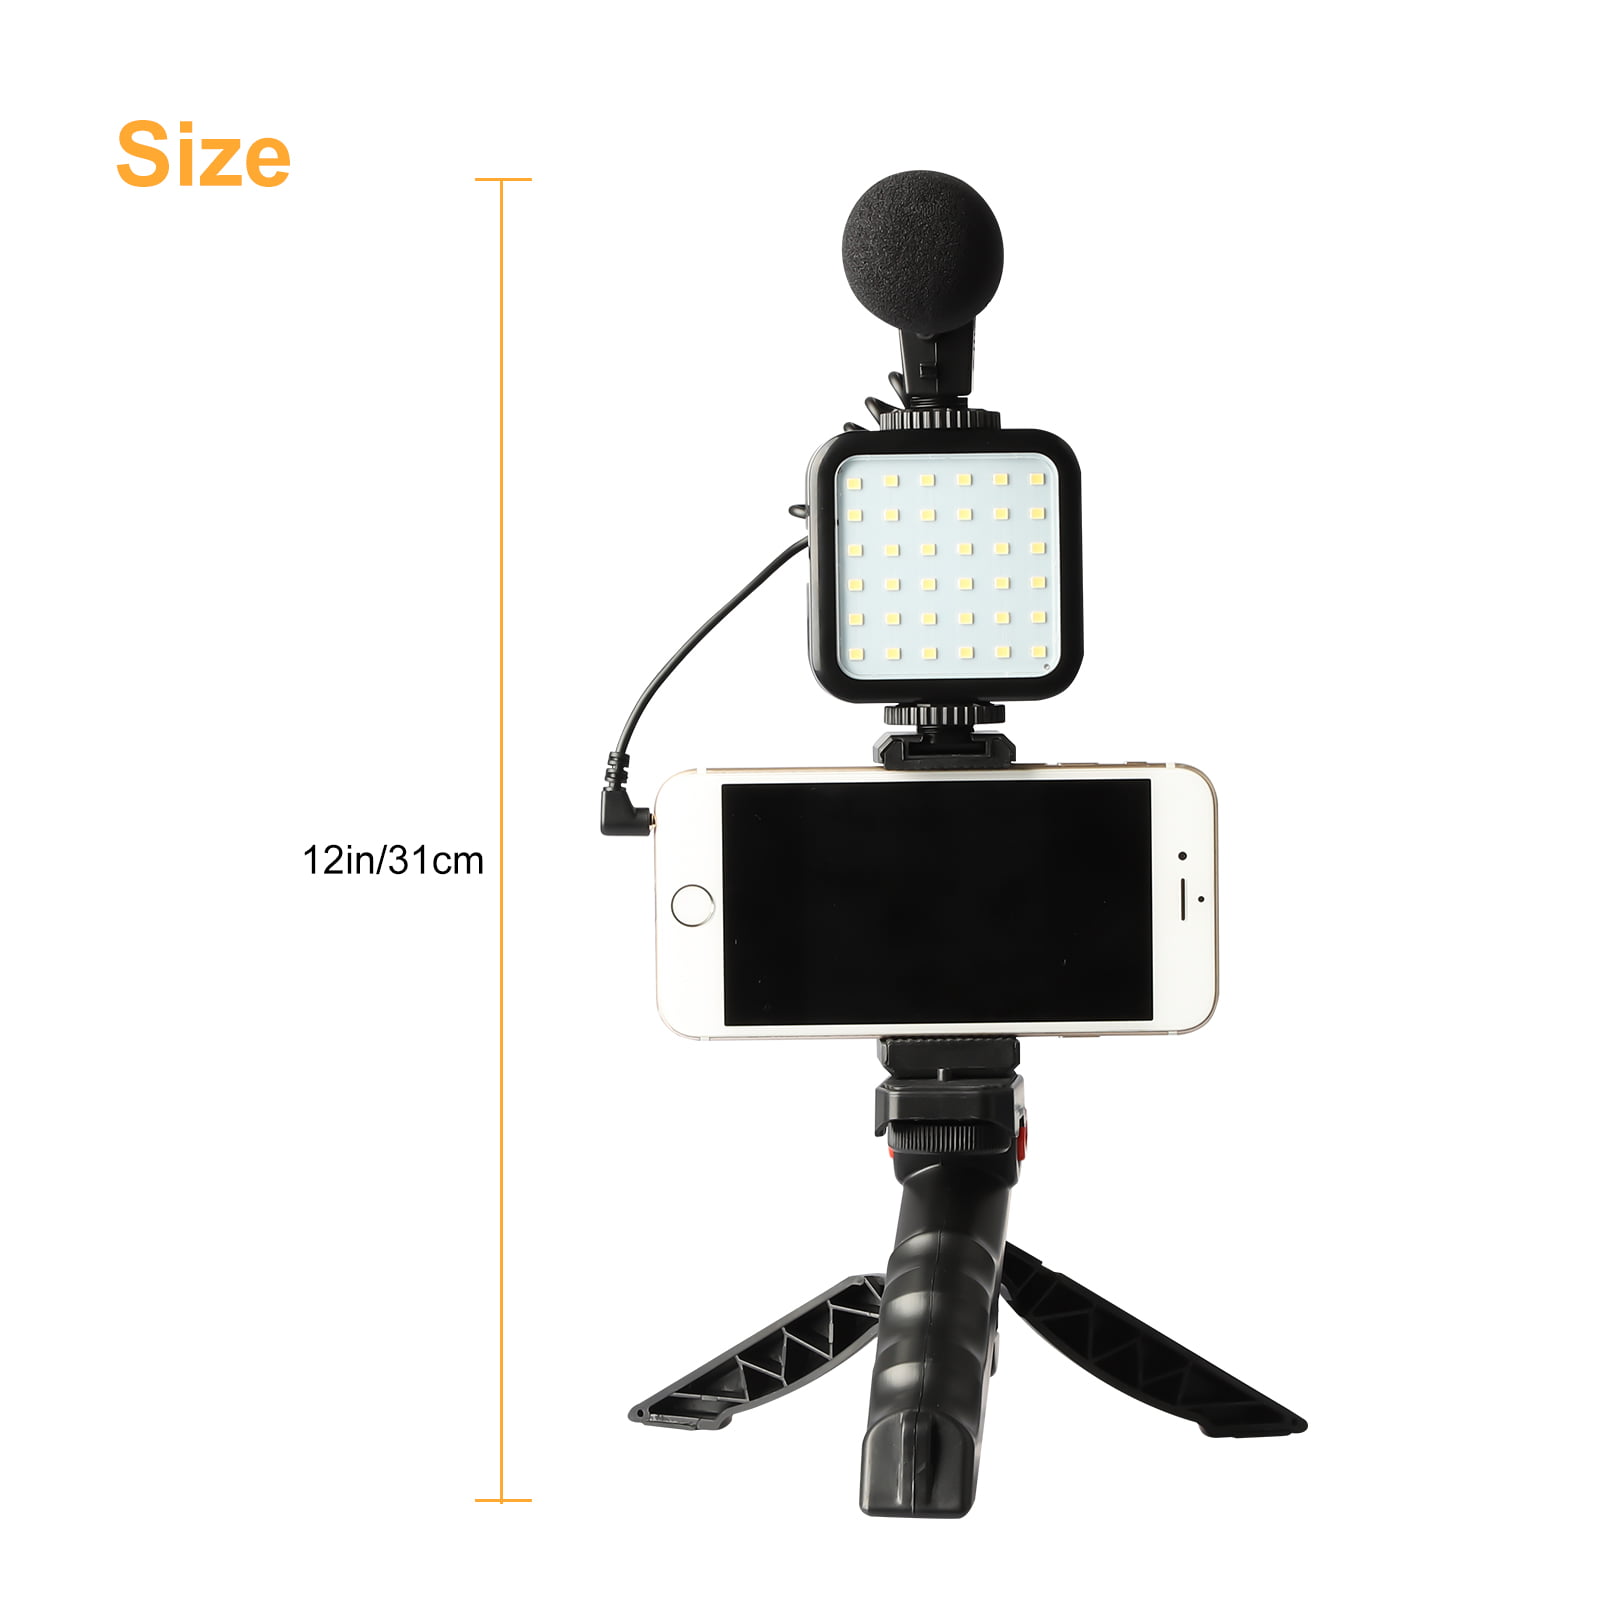 Compatible with iPhone 11 X Xr 8 7 Samsung Galaxy Note S10 and More C10M Live Video Shots Youtube Streaming Riqiorod Shotgun Microphone and Phone Tripod/Monopod Pole Holder Kit for Vlog 